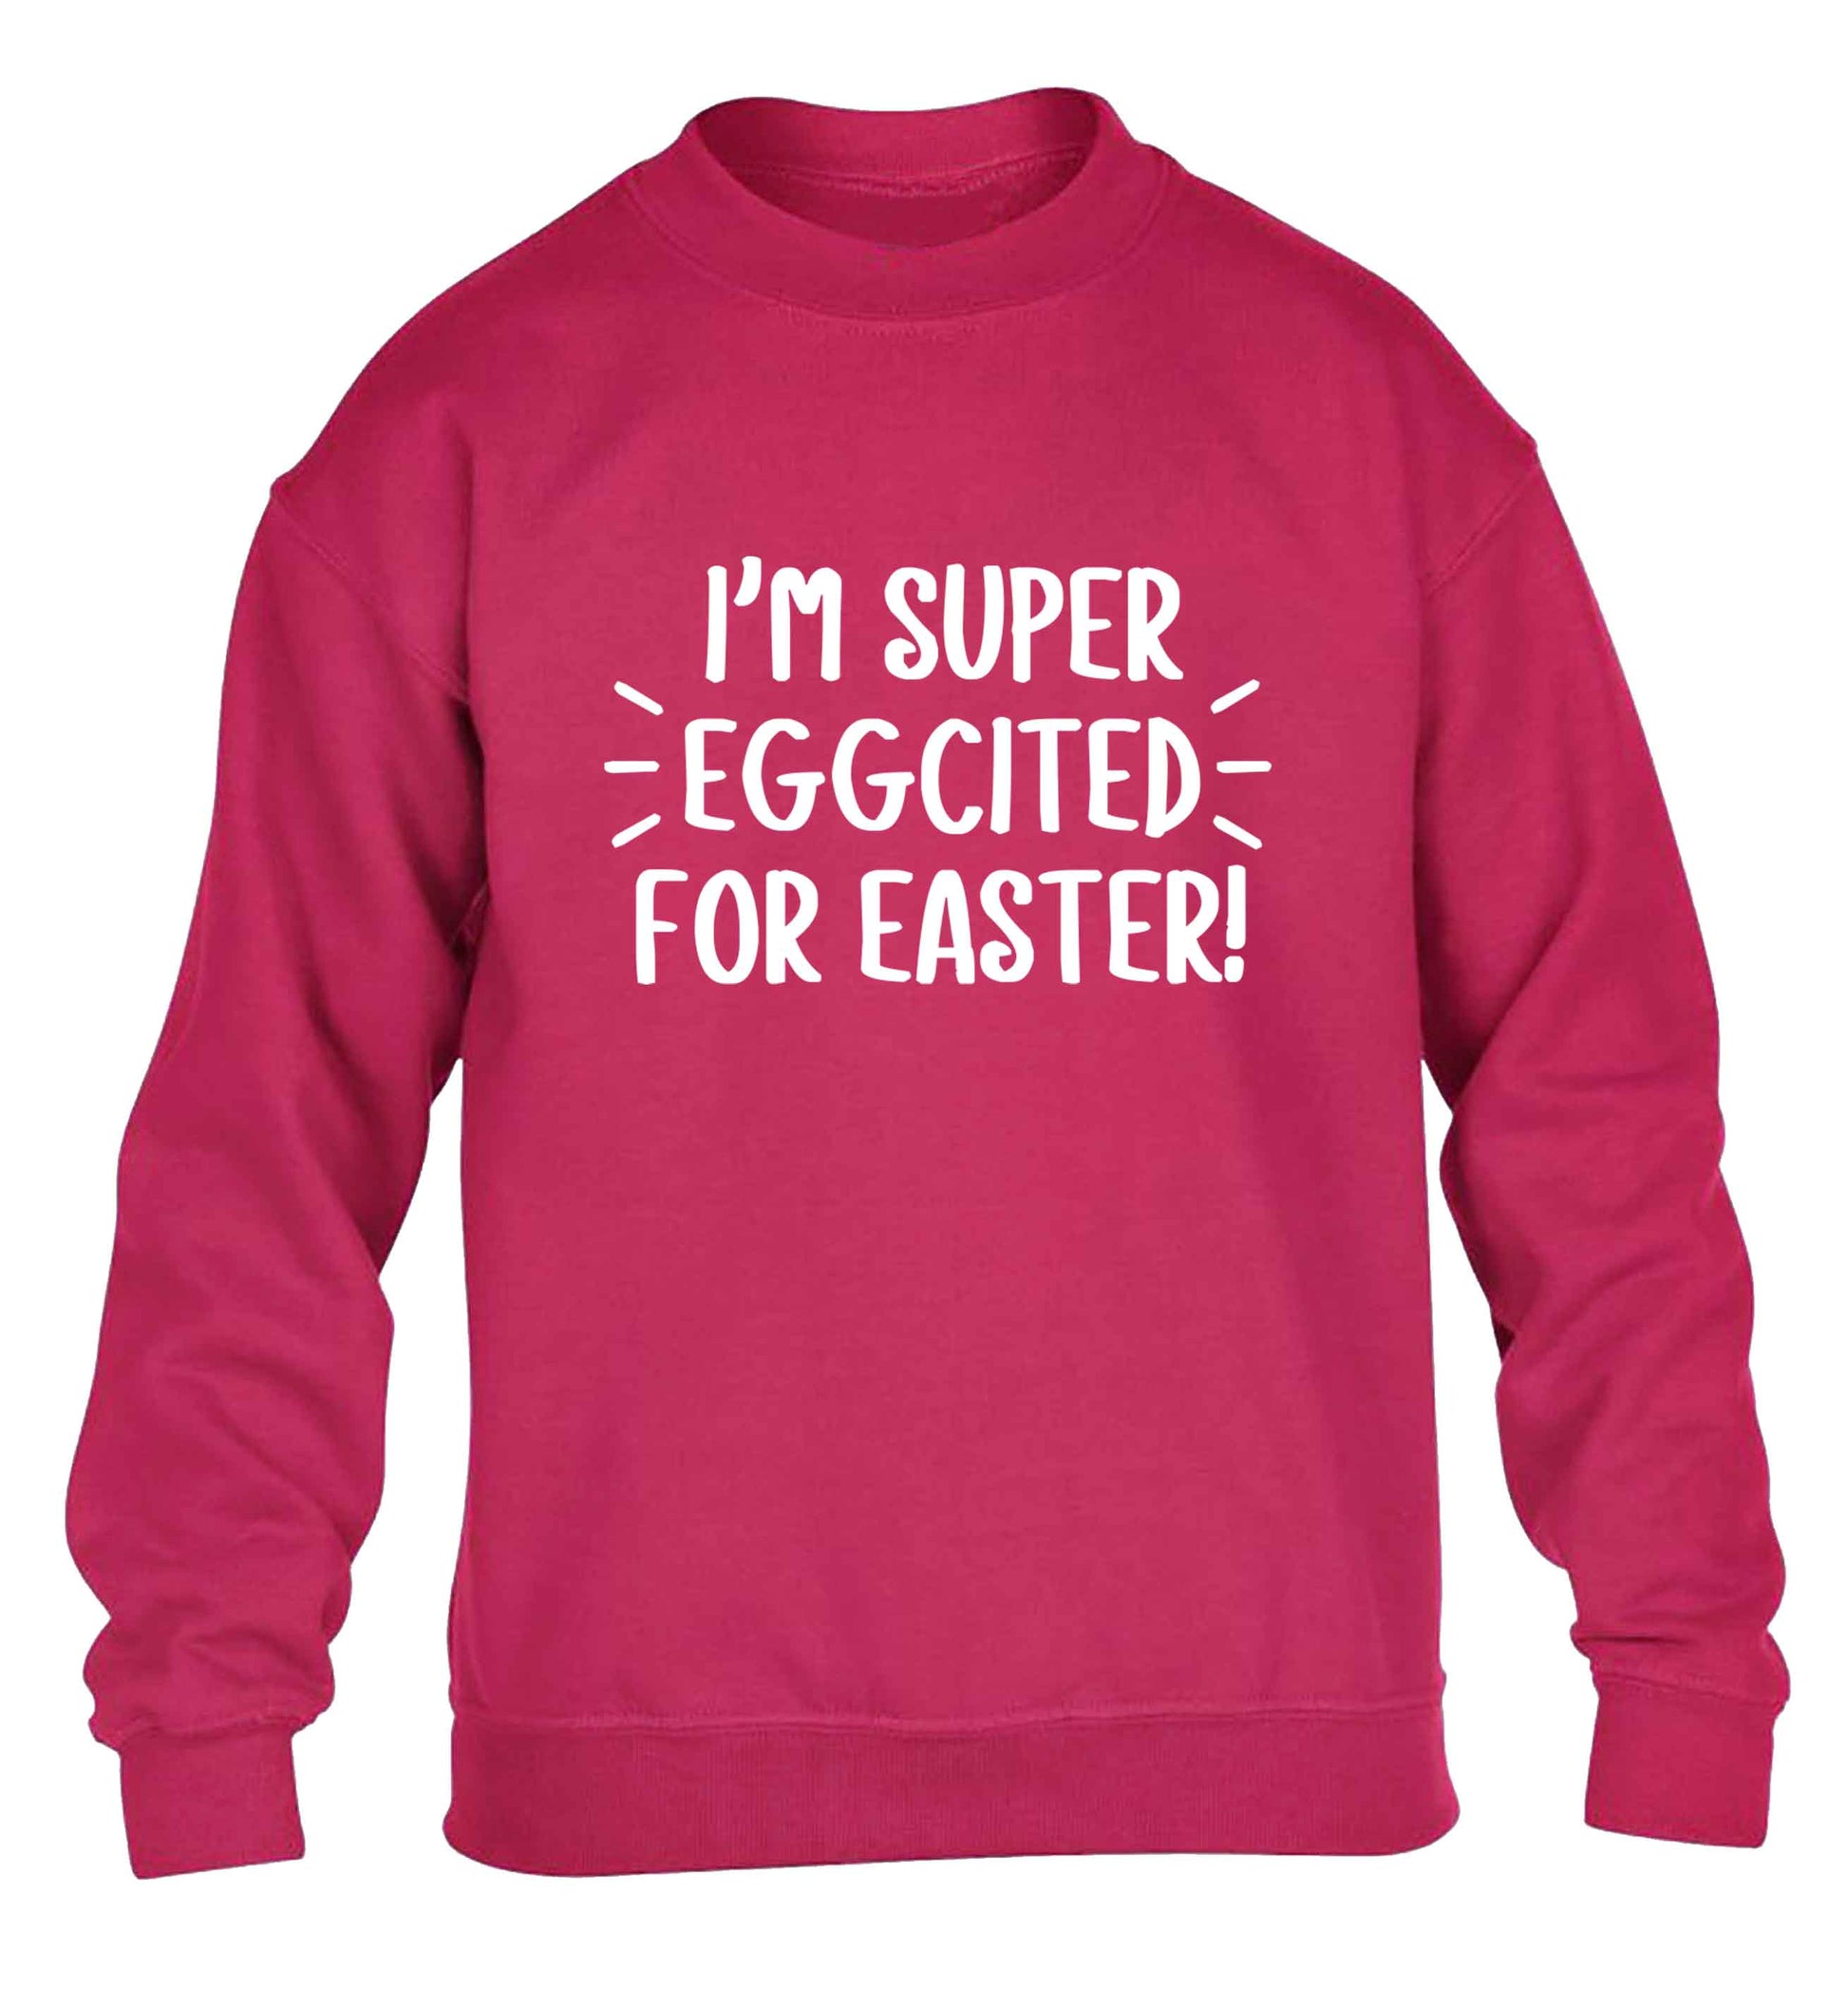 I'm super eggcited for Easter children's pink sweater 12-13 Years